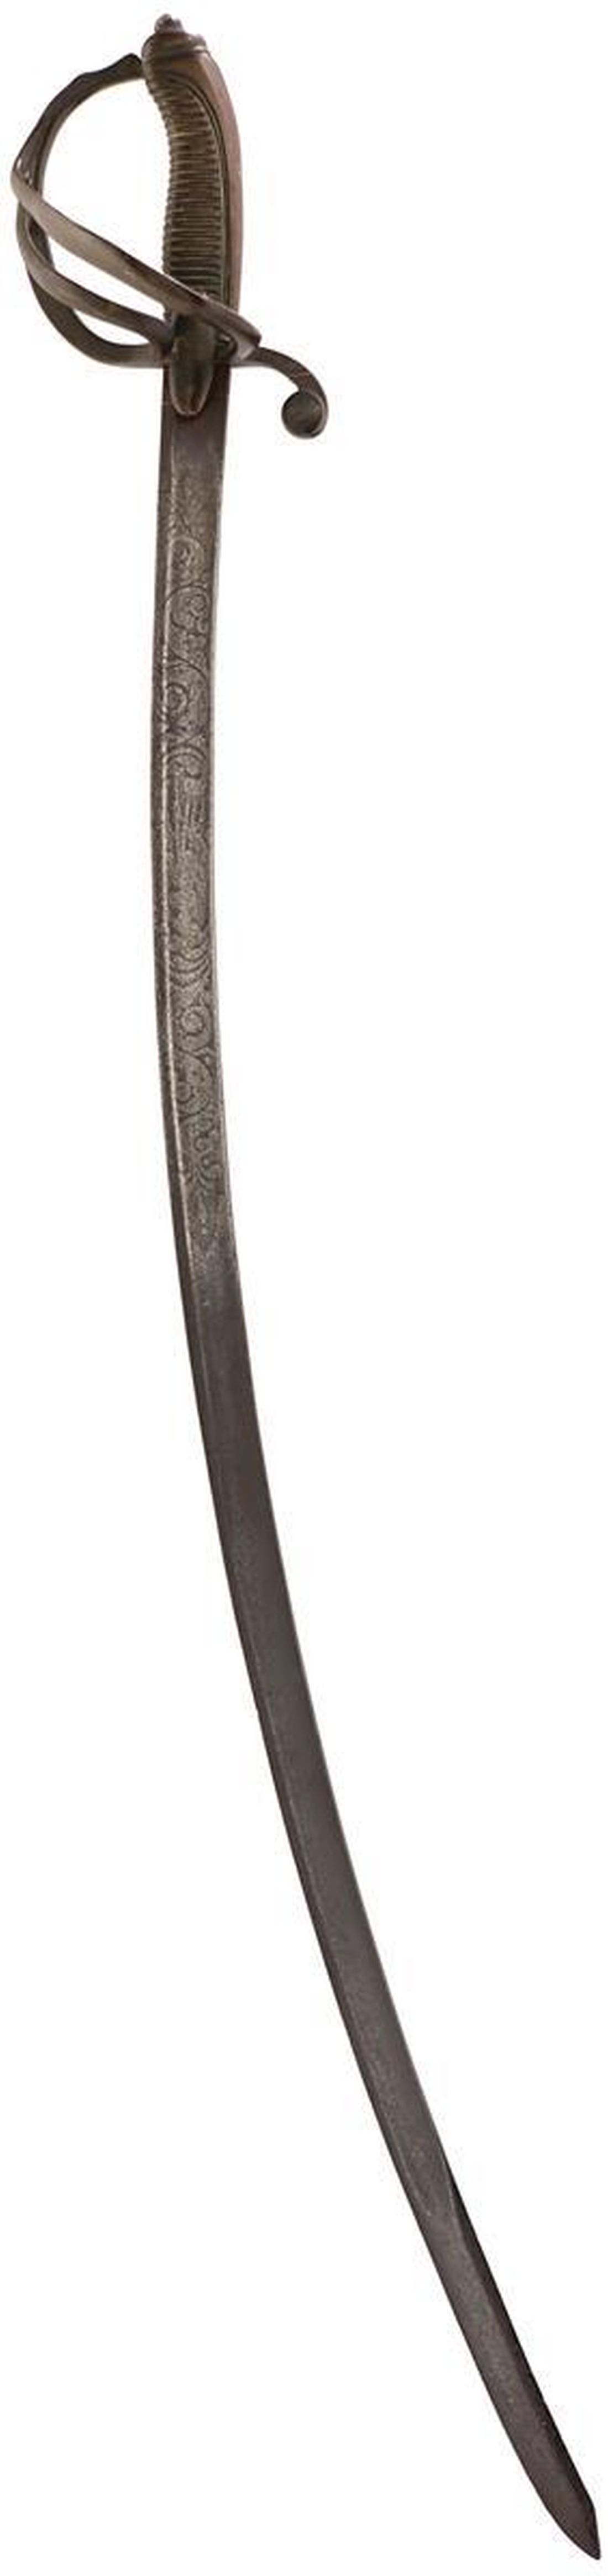 A NAPOLEONIC PERIOD CONTINENTAL CAVALRY SABRE, 87.5cm curved blade decorated with scrolling